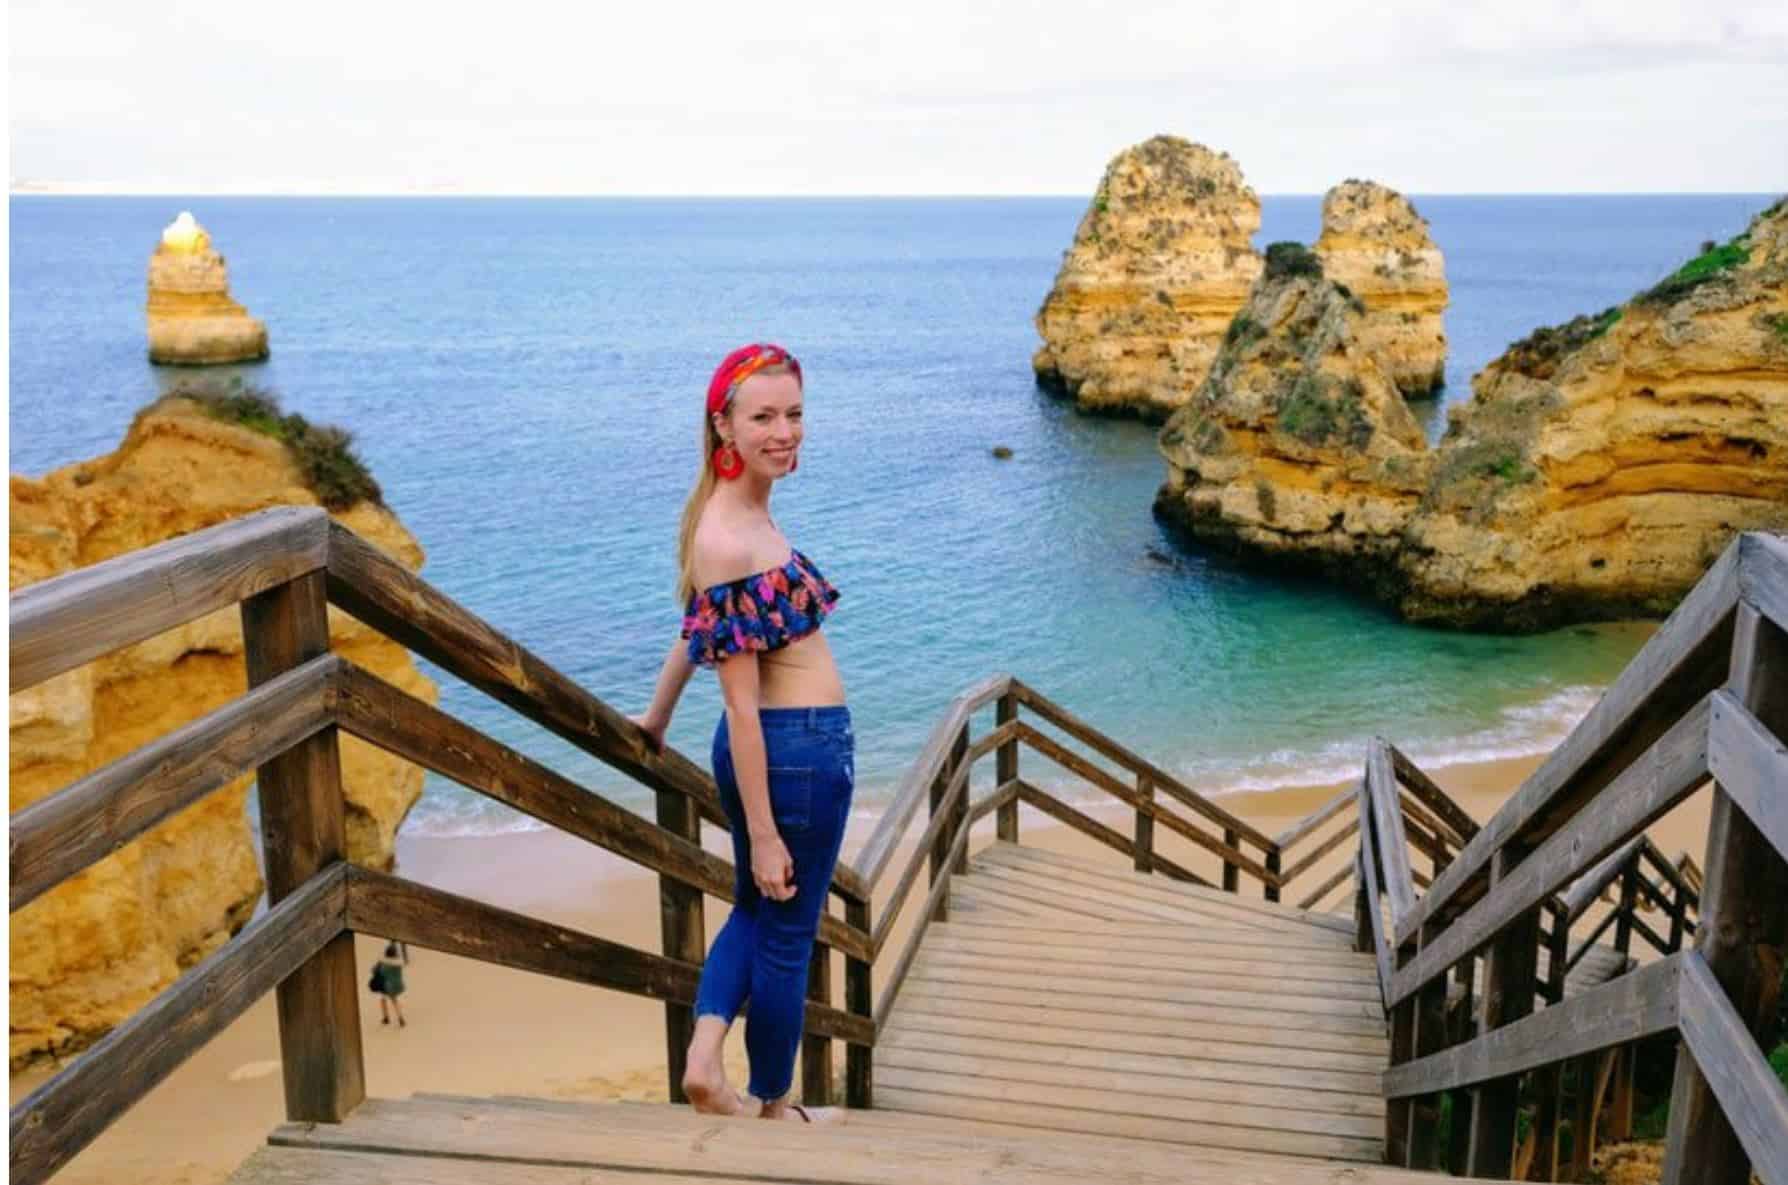 a woman walking down wooden stairs towards beach with rock formations